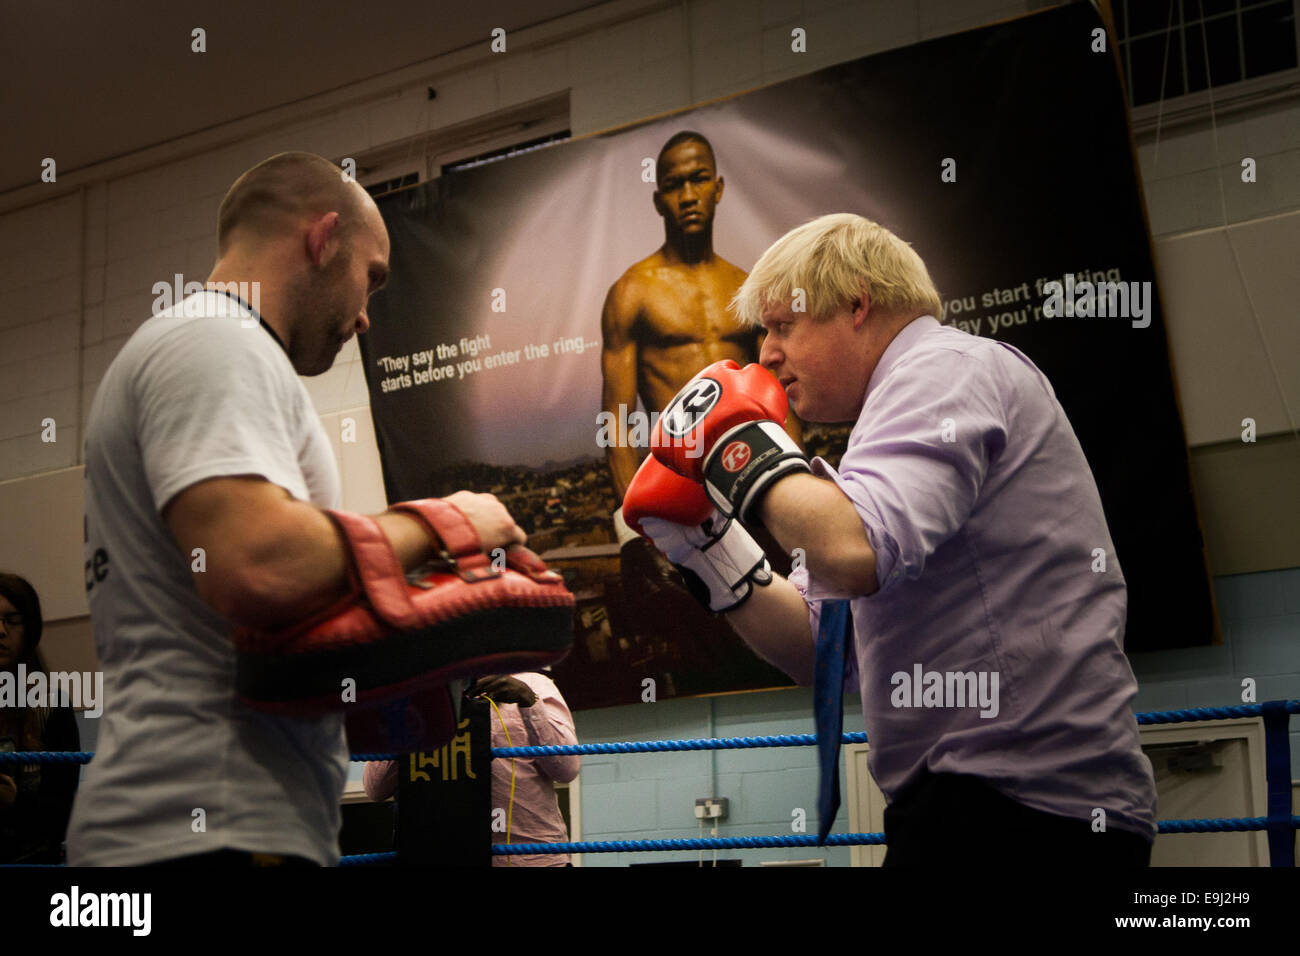 London, UK. 28th October, 2014.  The Mayor of London, Boris Johnson, visits a training session at Fight for Peace Academy in Newham. Fight for Peace uses boxing and martial arts combined with education and personal development to realise the potential of young people in the borough at risk of crime and violence. First established in Rio in 2000 by Luke Dowdney MBE, it was replicated in Newham in 2007. It is now expanding globally and began rolling out across the UK. Credit:  Paul Davey/Alamy Live News Stock Photo